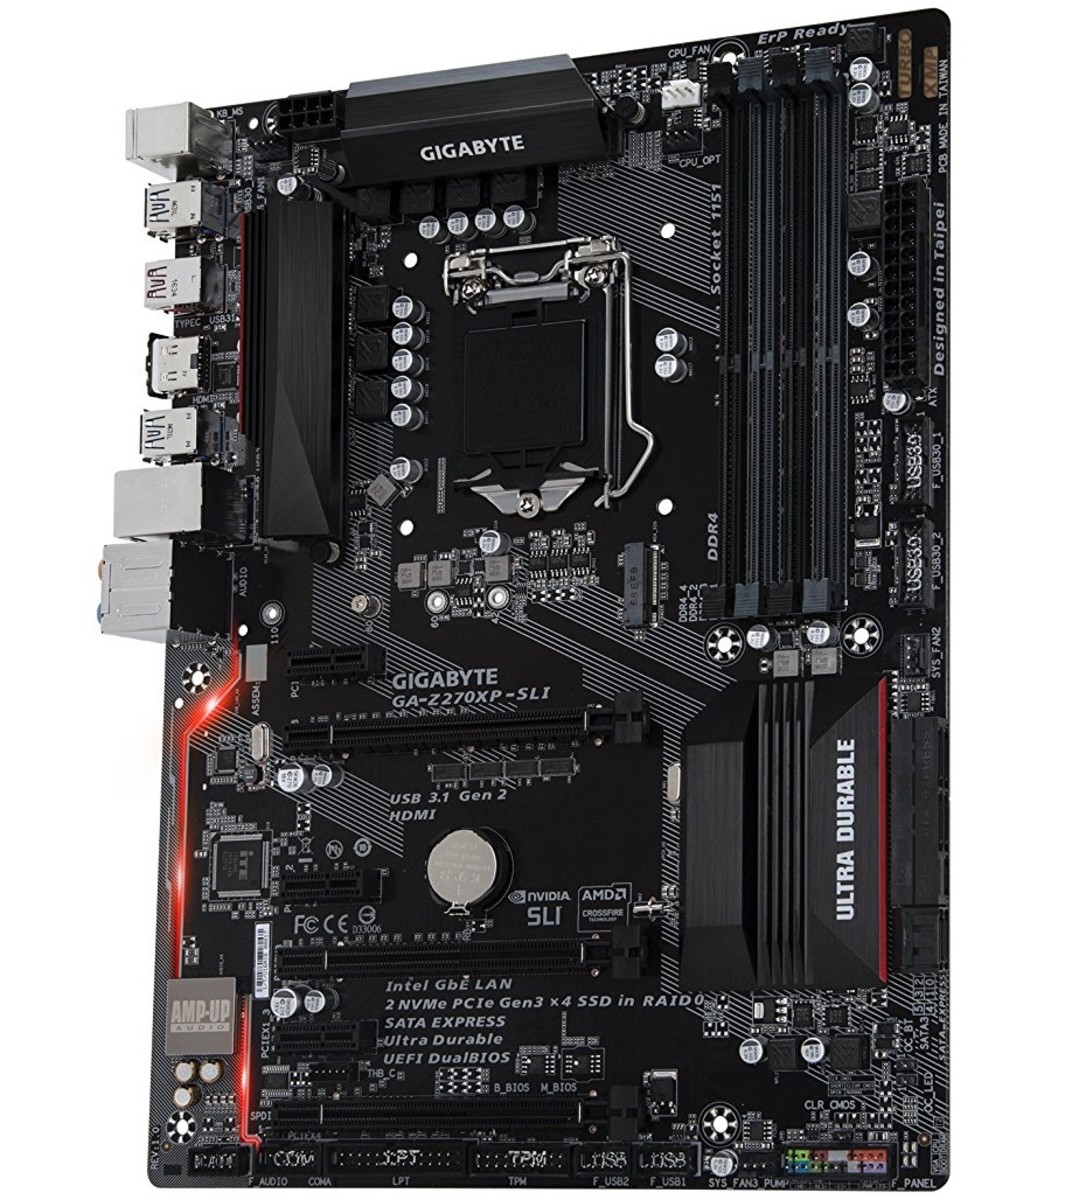 Gigabyte's GA-Z270XP-SLI, shown above, has a lot of great features, allows for overclocking, and comes in at just $139.  